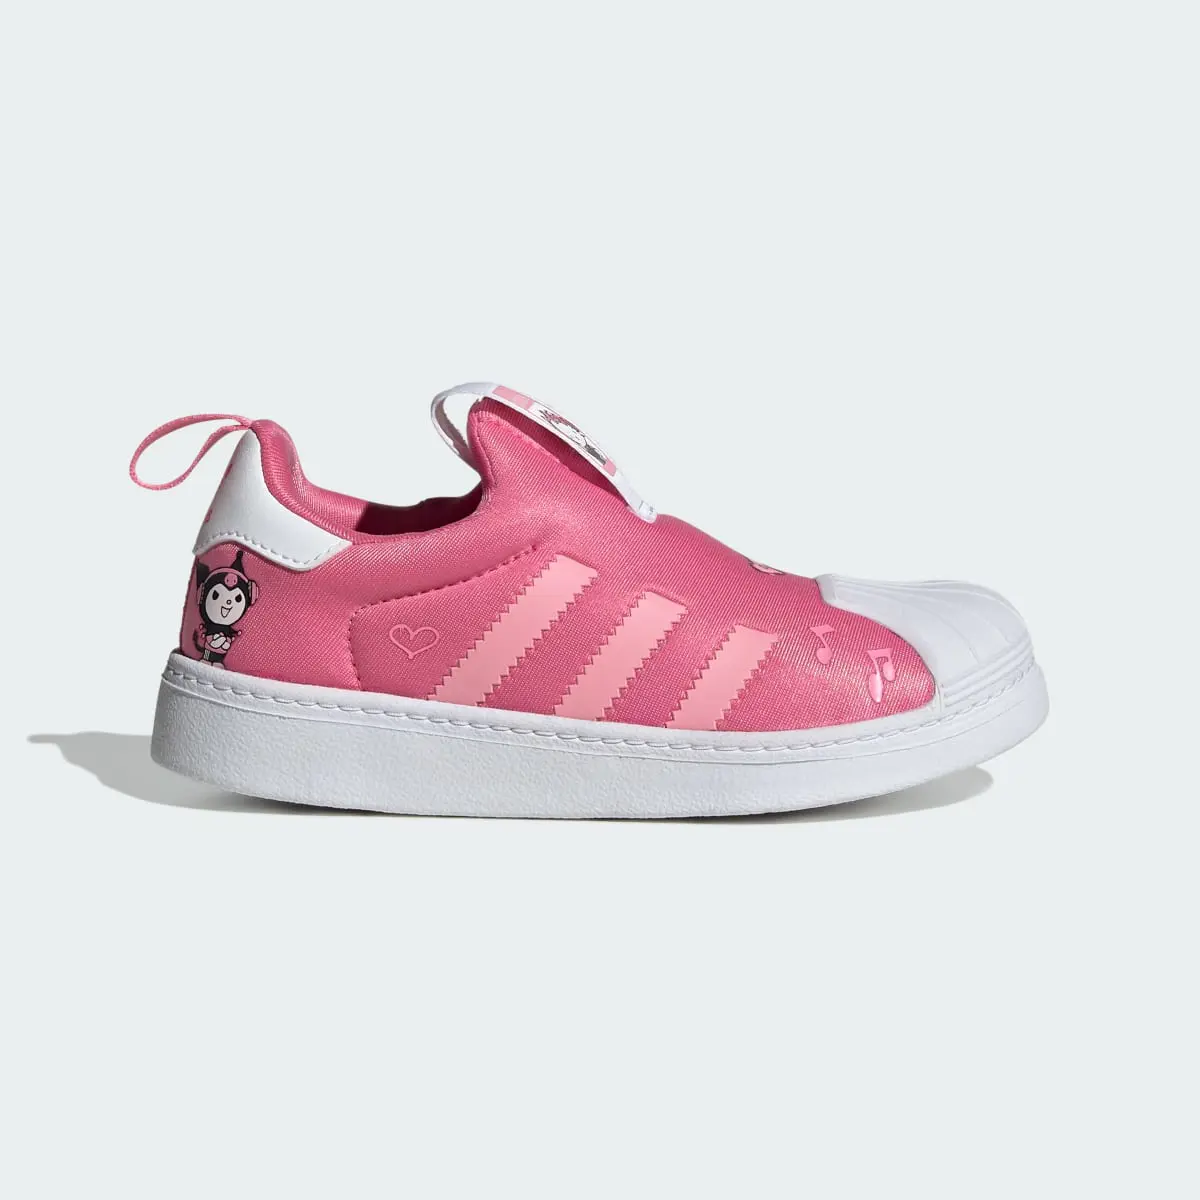 Adidas Originals x Hello Kitty and Friends Superstar 360 Shoes Kids. 2